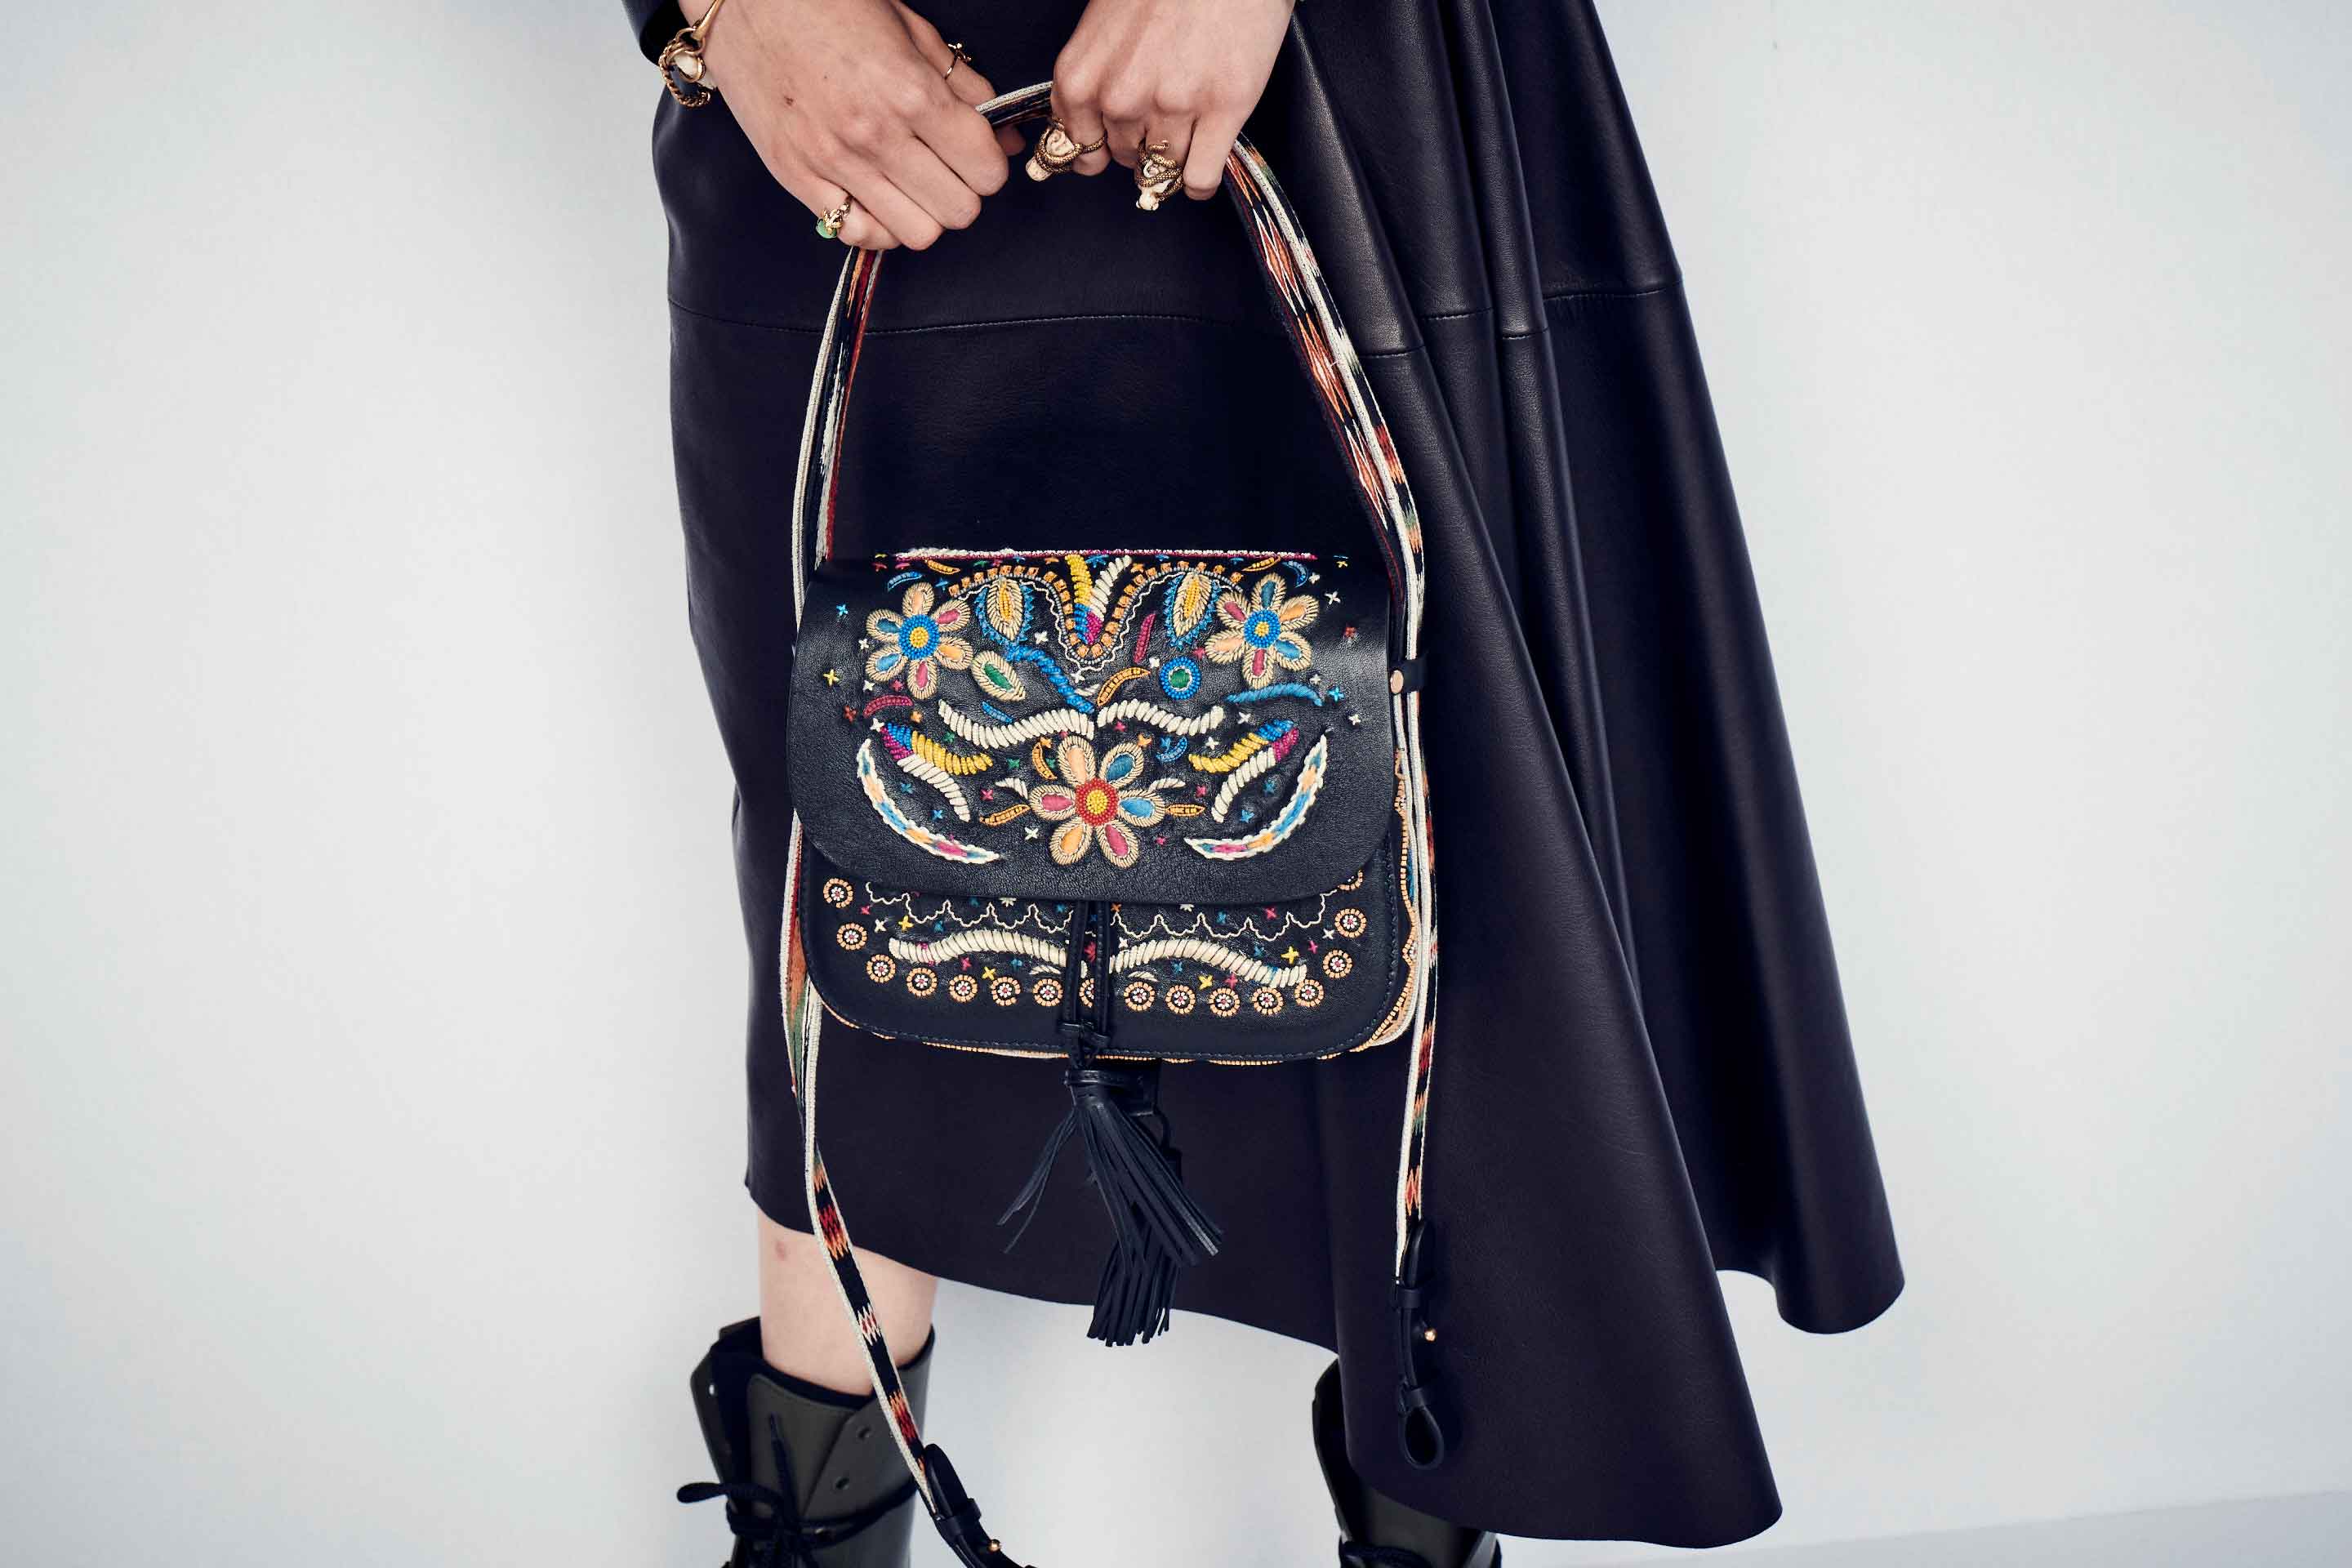 Dior Cruise 2019 - Embroidered Bag